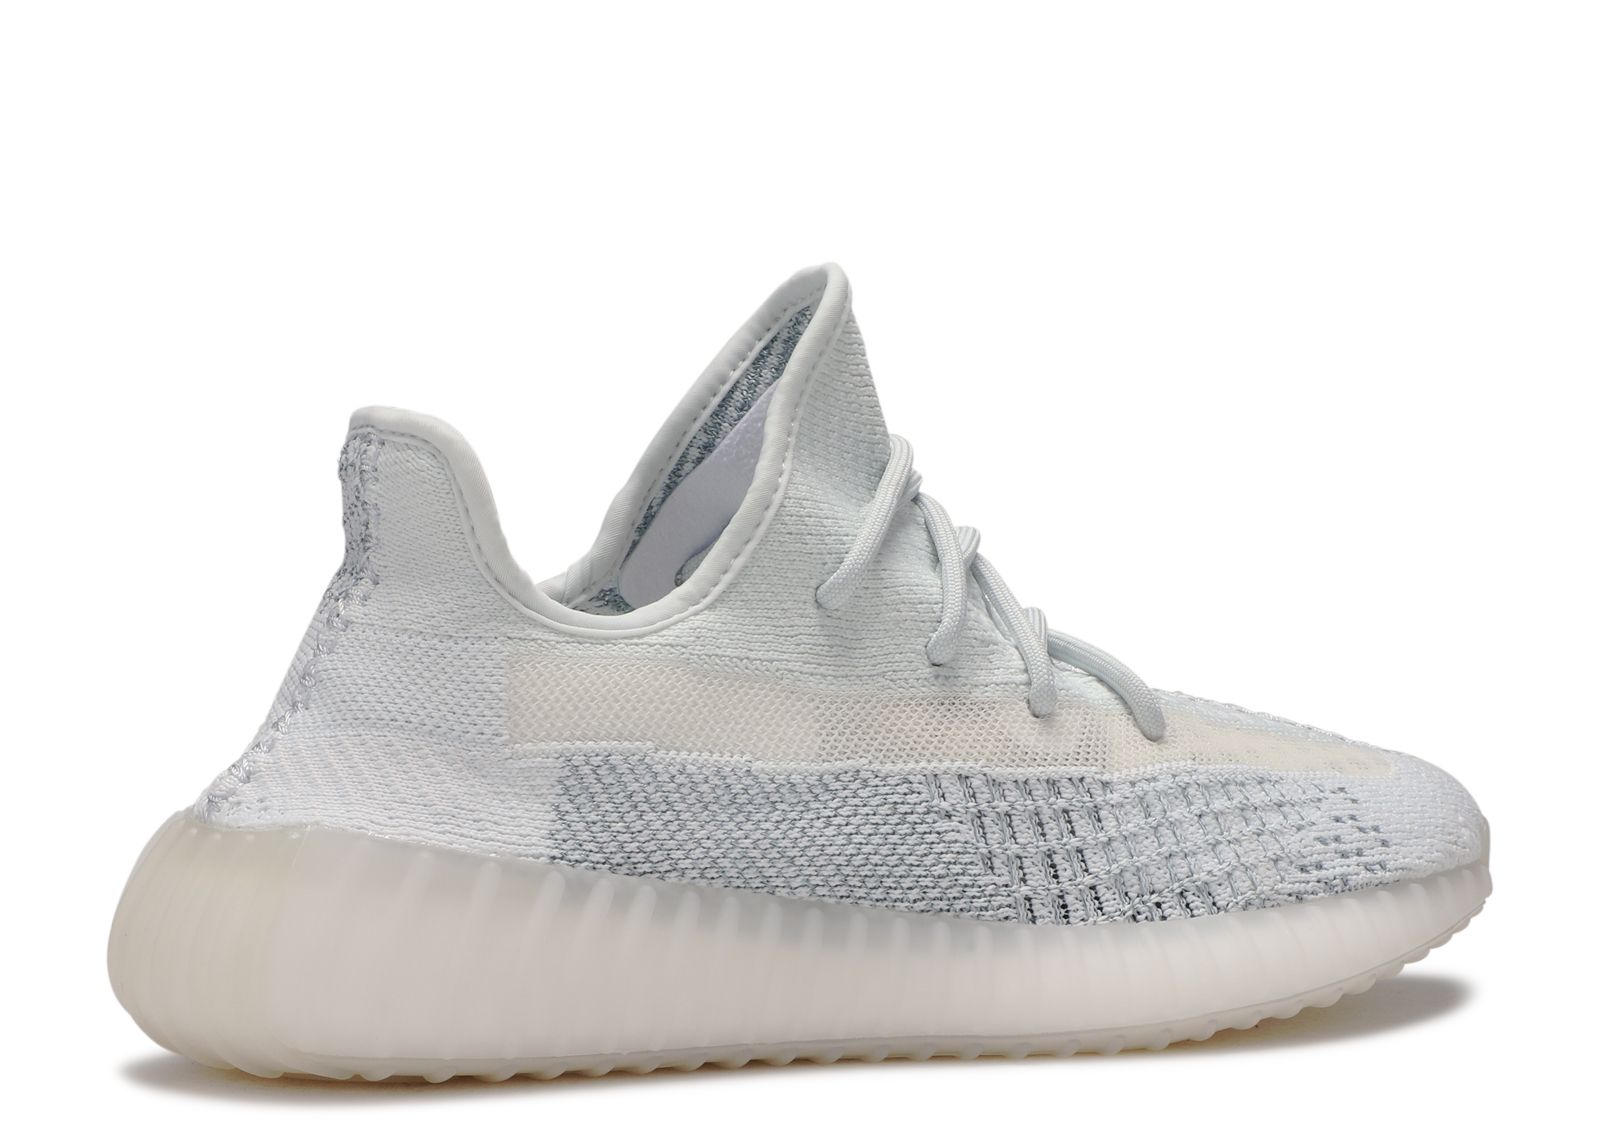 yeezy boost cloud white reflective